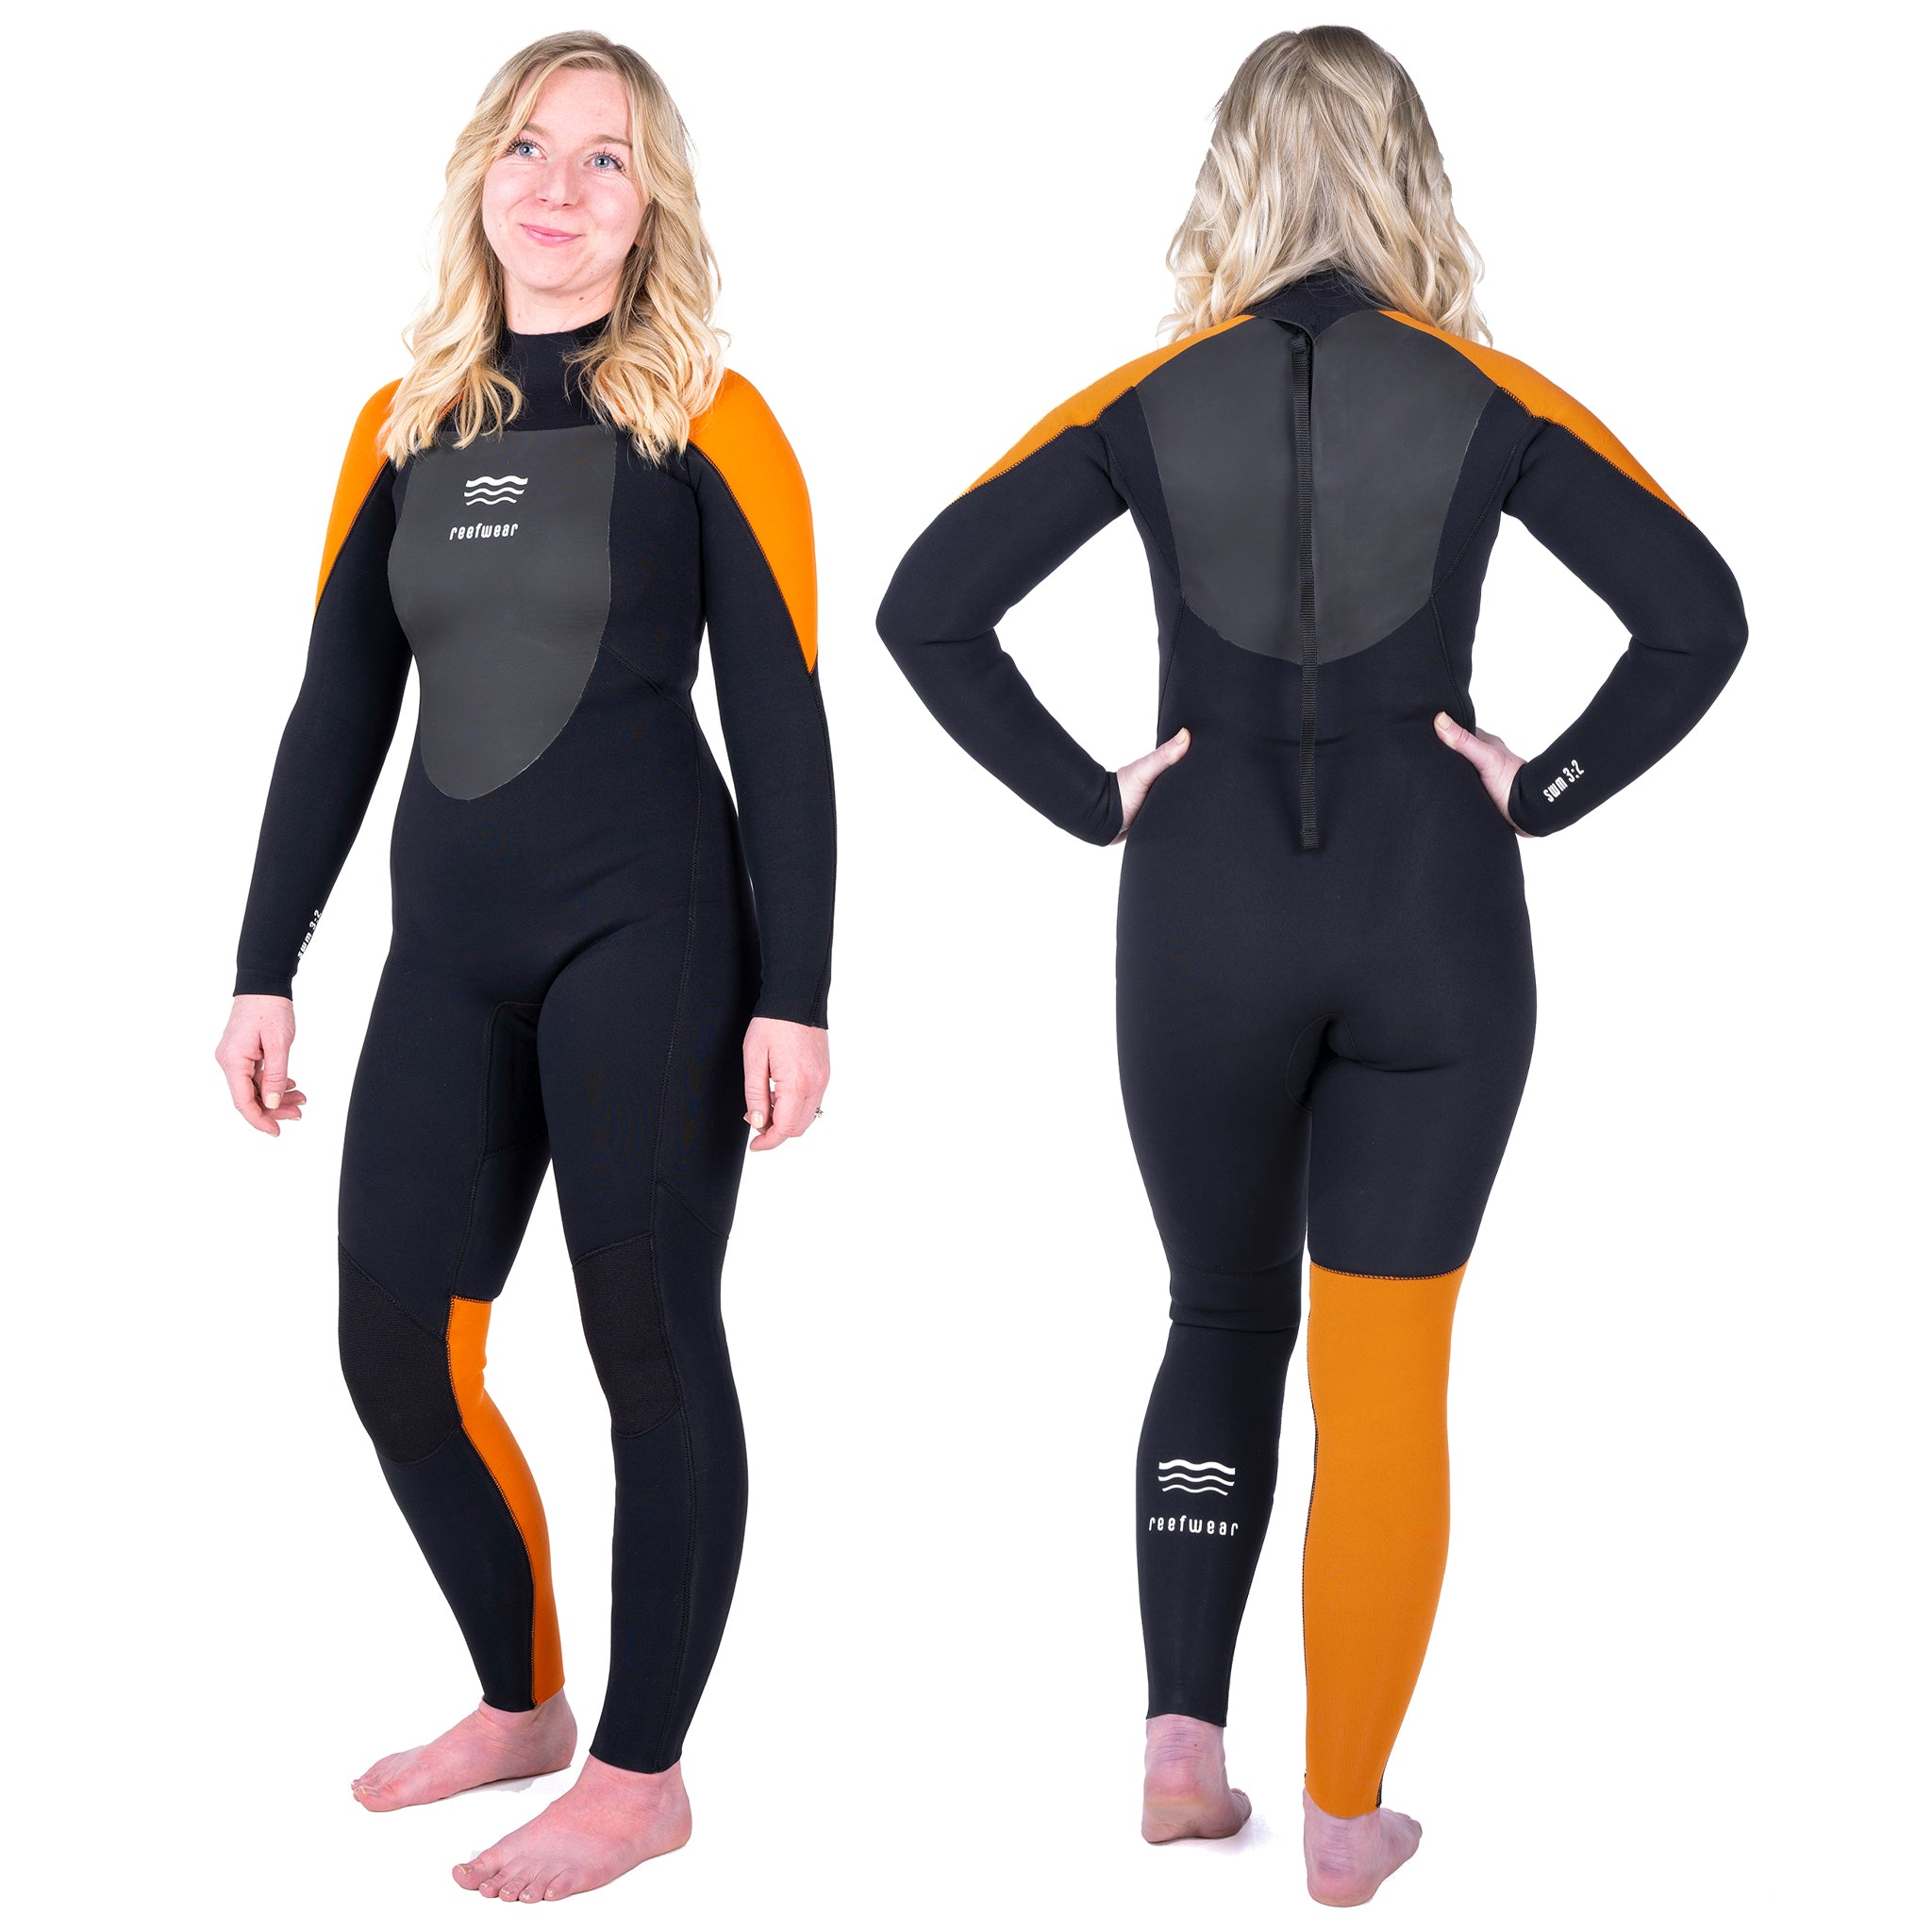 Reefwear SWM 3/2mm Blindstitched Women's Swim Wetsuit | Back and side view